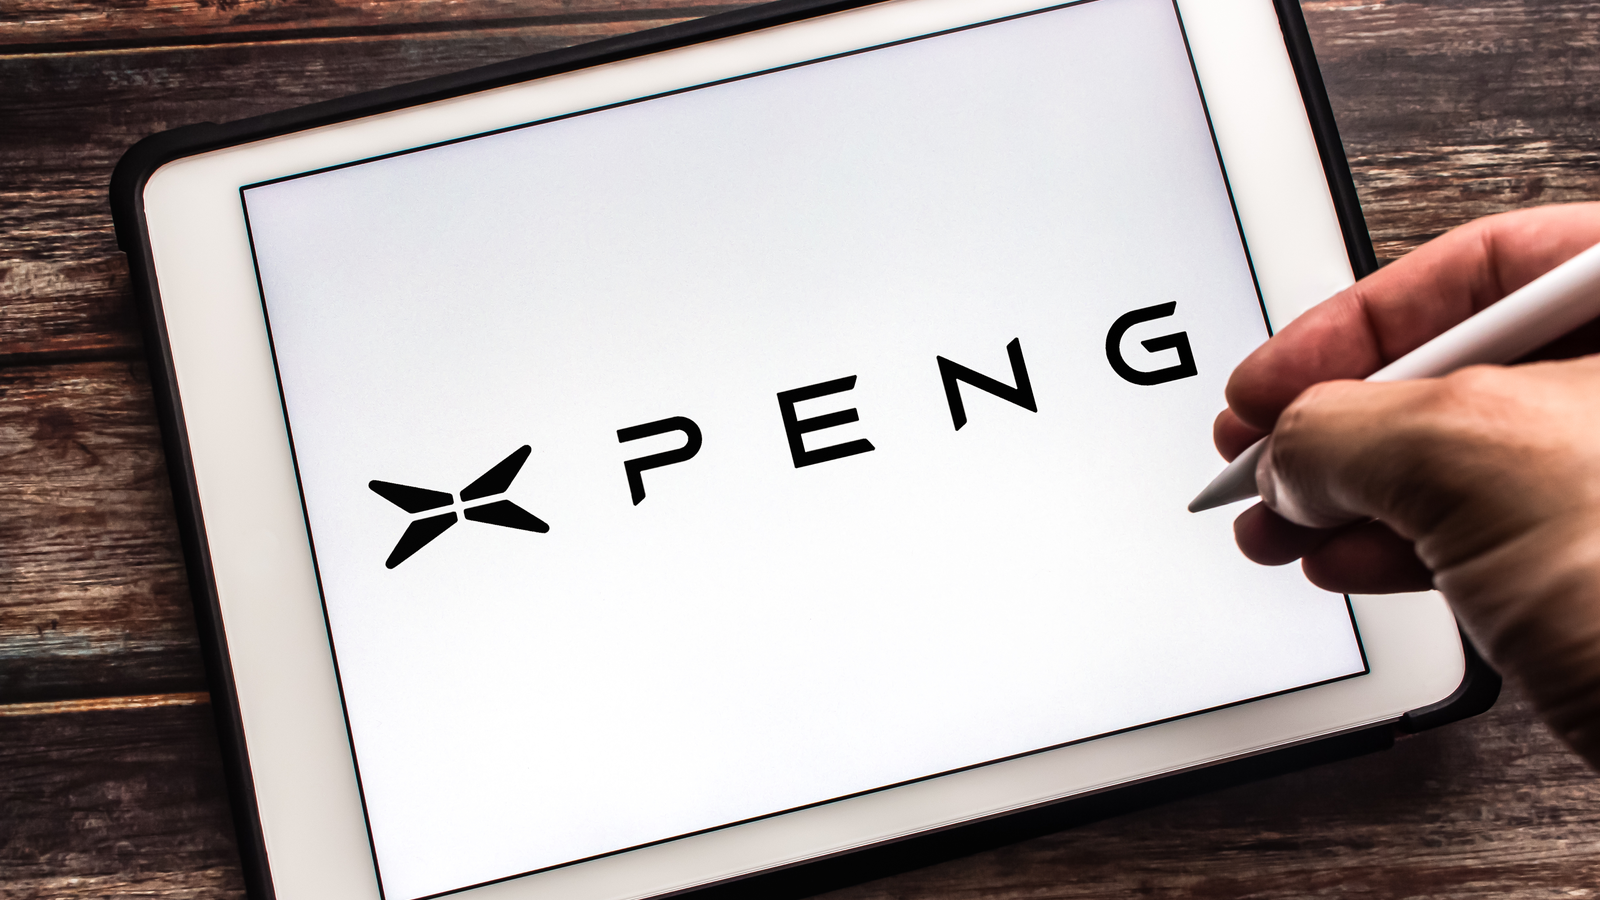 The Logo of Chinese electric vehicle manufacturer Xpeng (Guangzhou Xiaopeng Motors, also known as XMotors.ai) on tablet. XPEV Stock